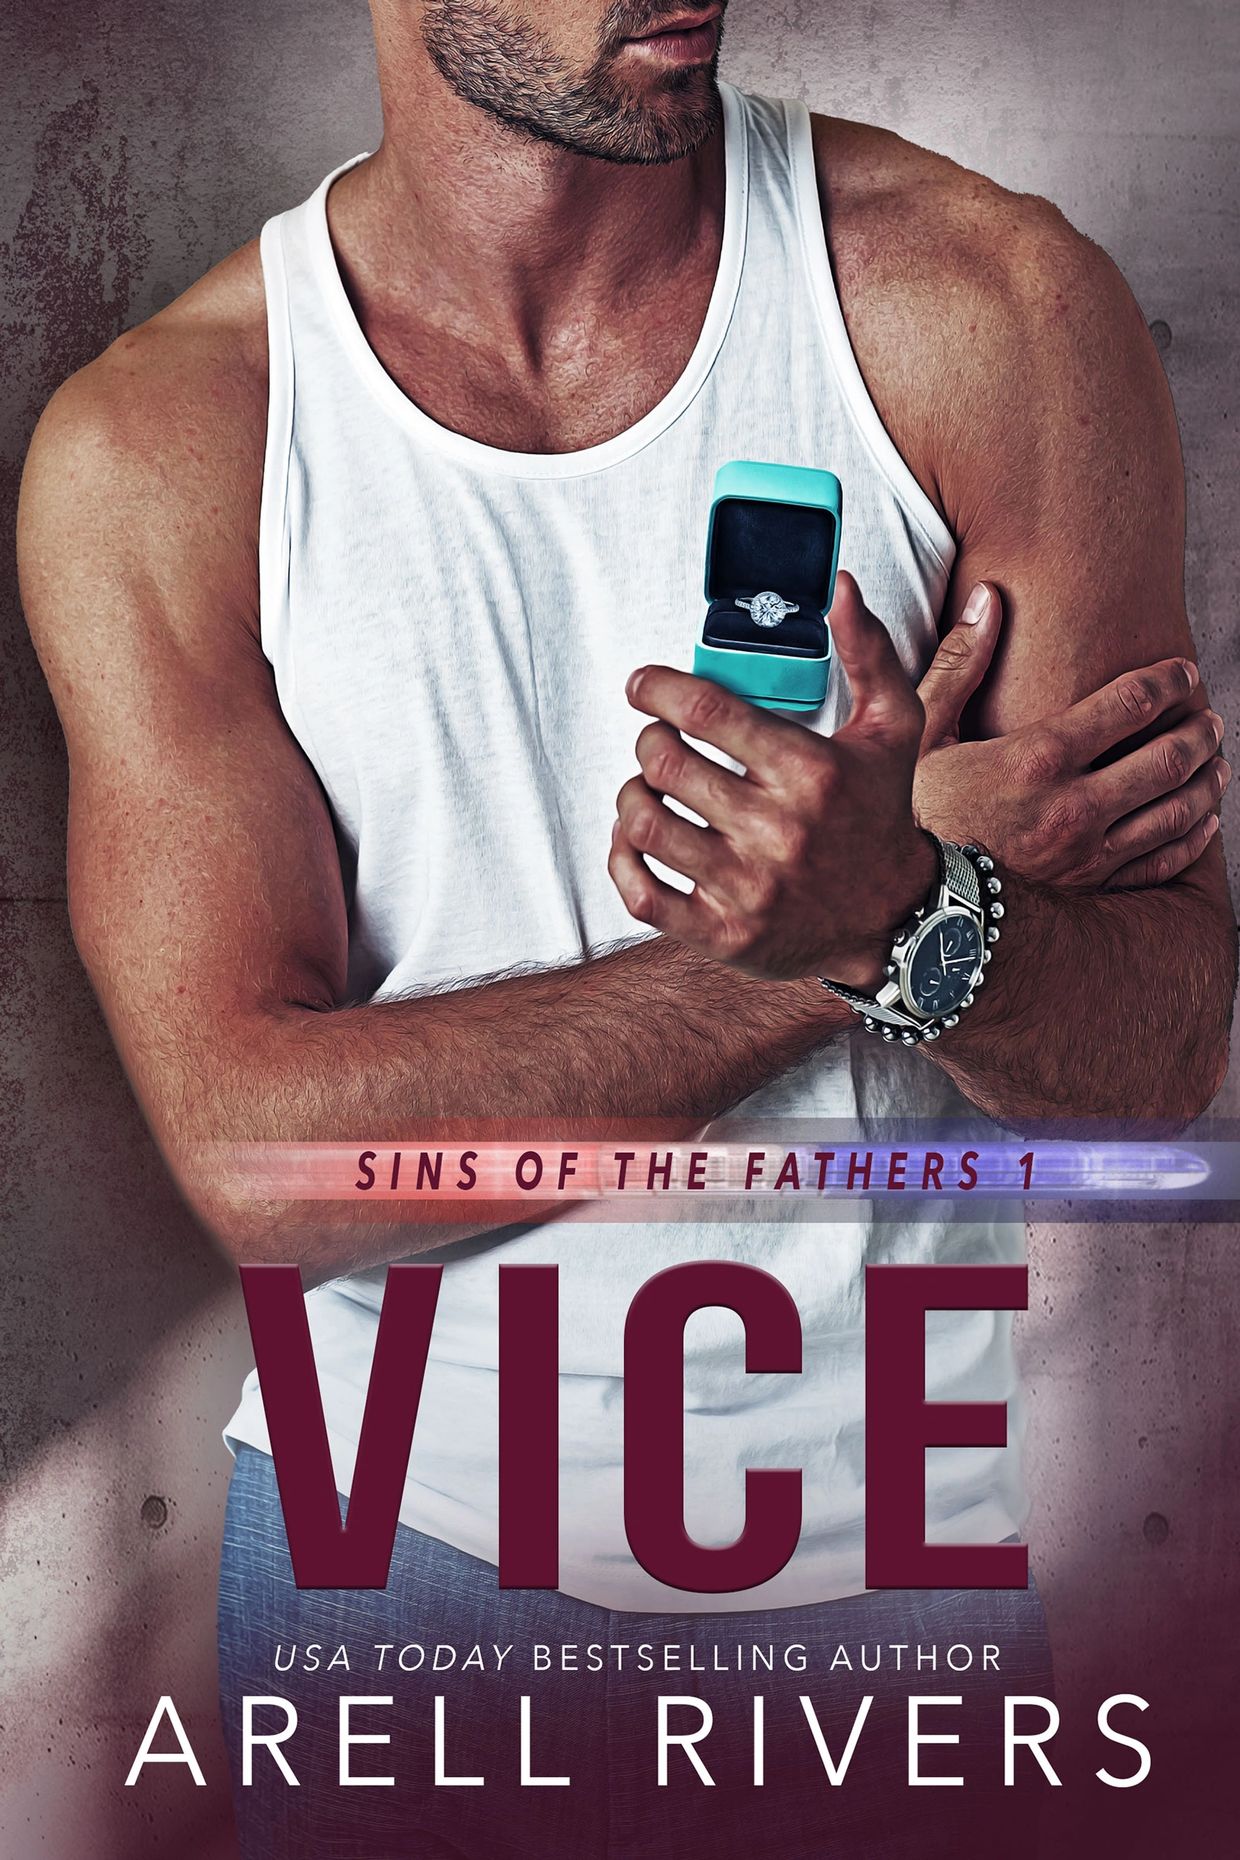 Vice, prequel novella in the Sins of the Fathers series